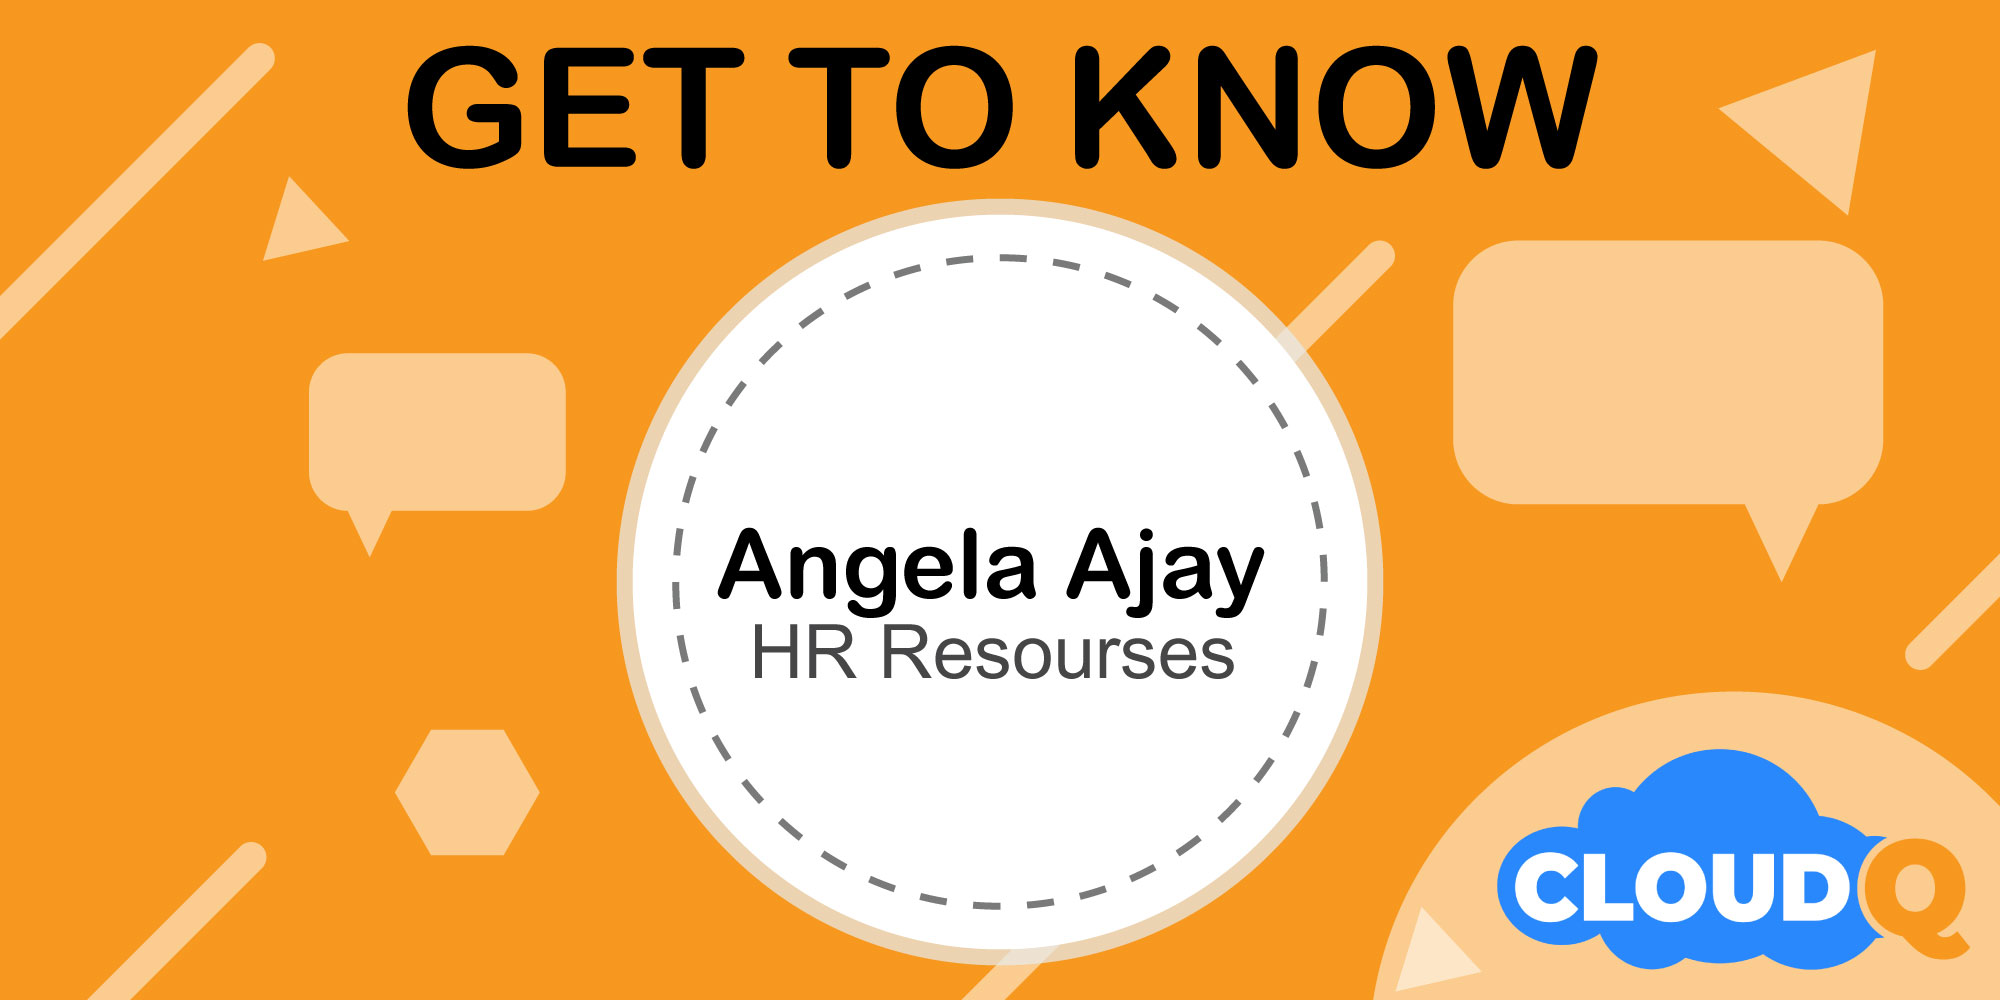 get to know angela ajay